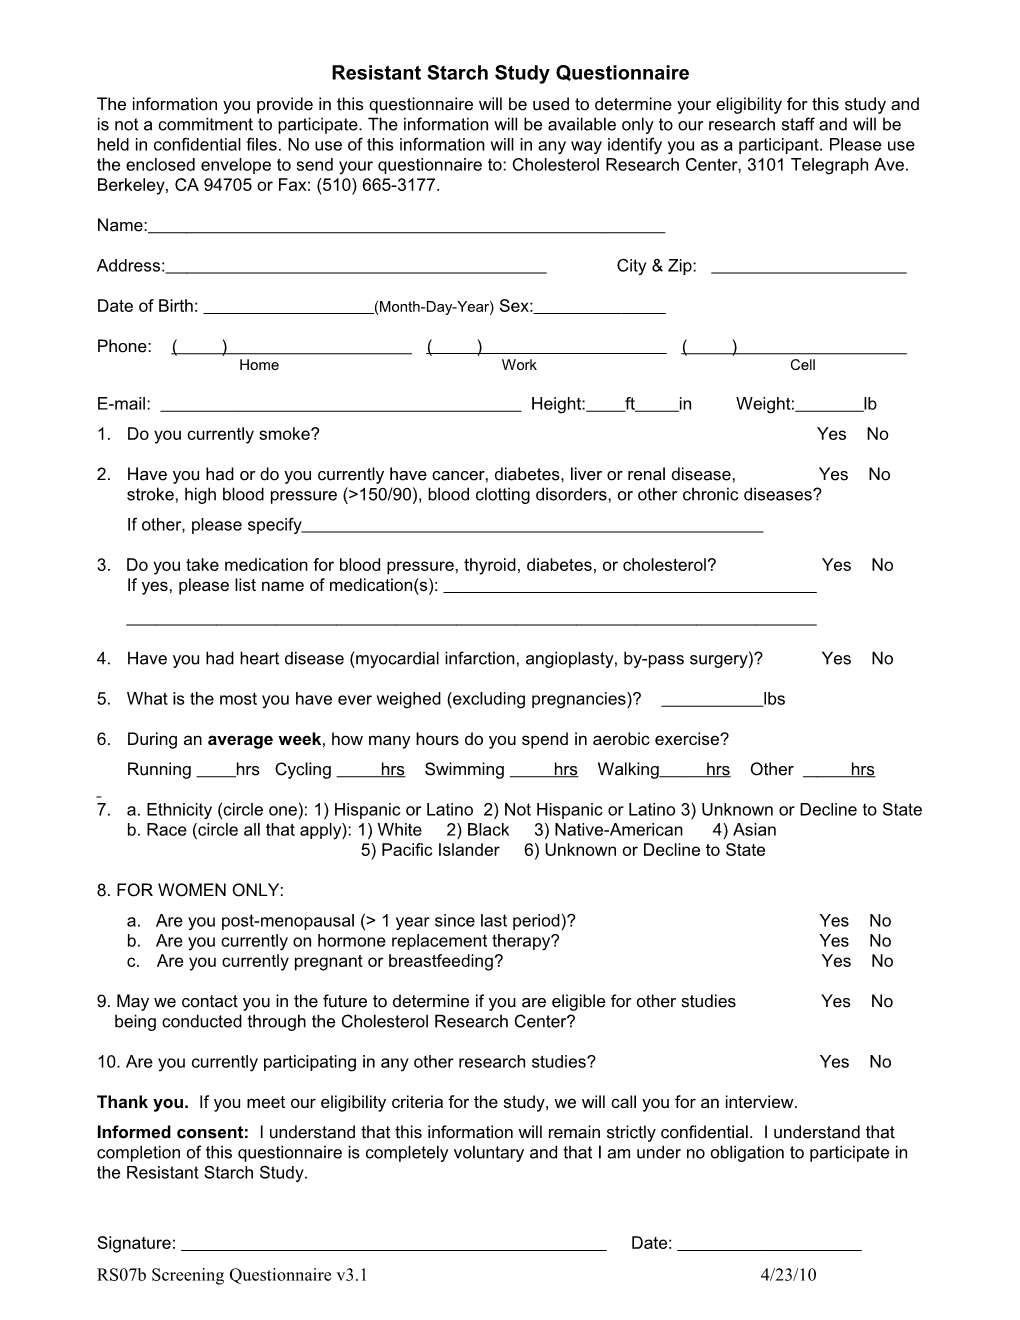 The Information You Provide in This Questionnaire Will Be Used to Determine Your Eligibility